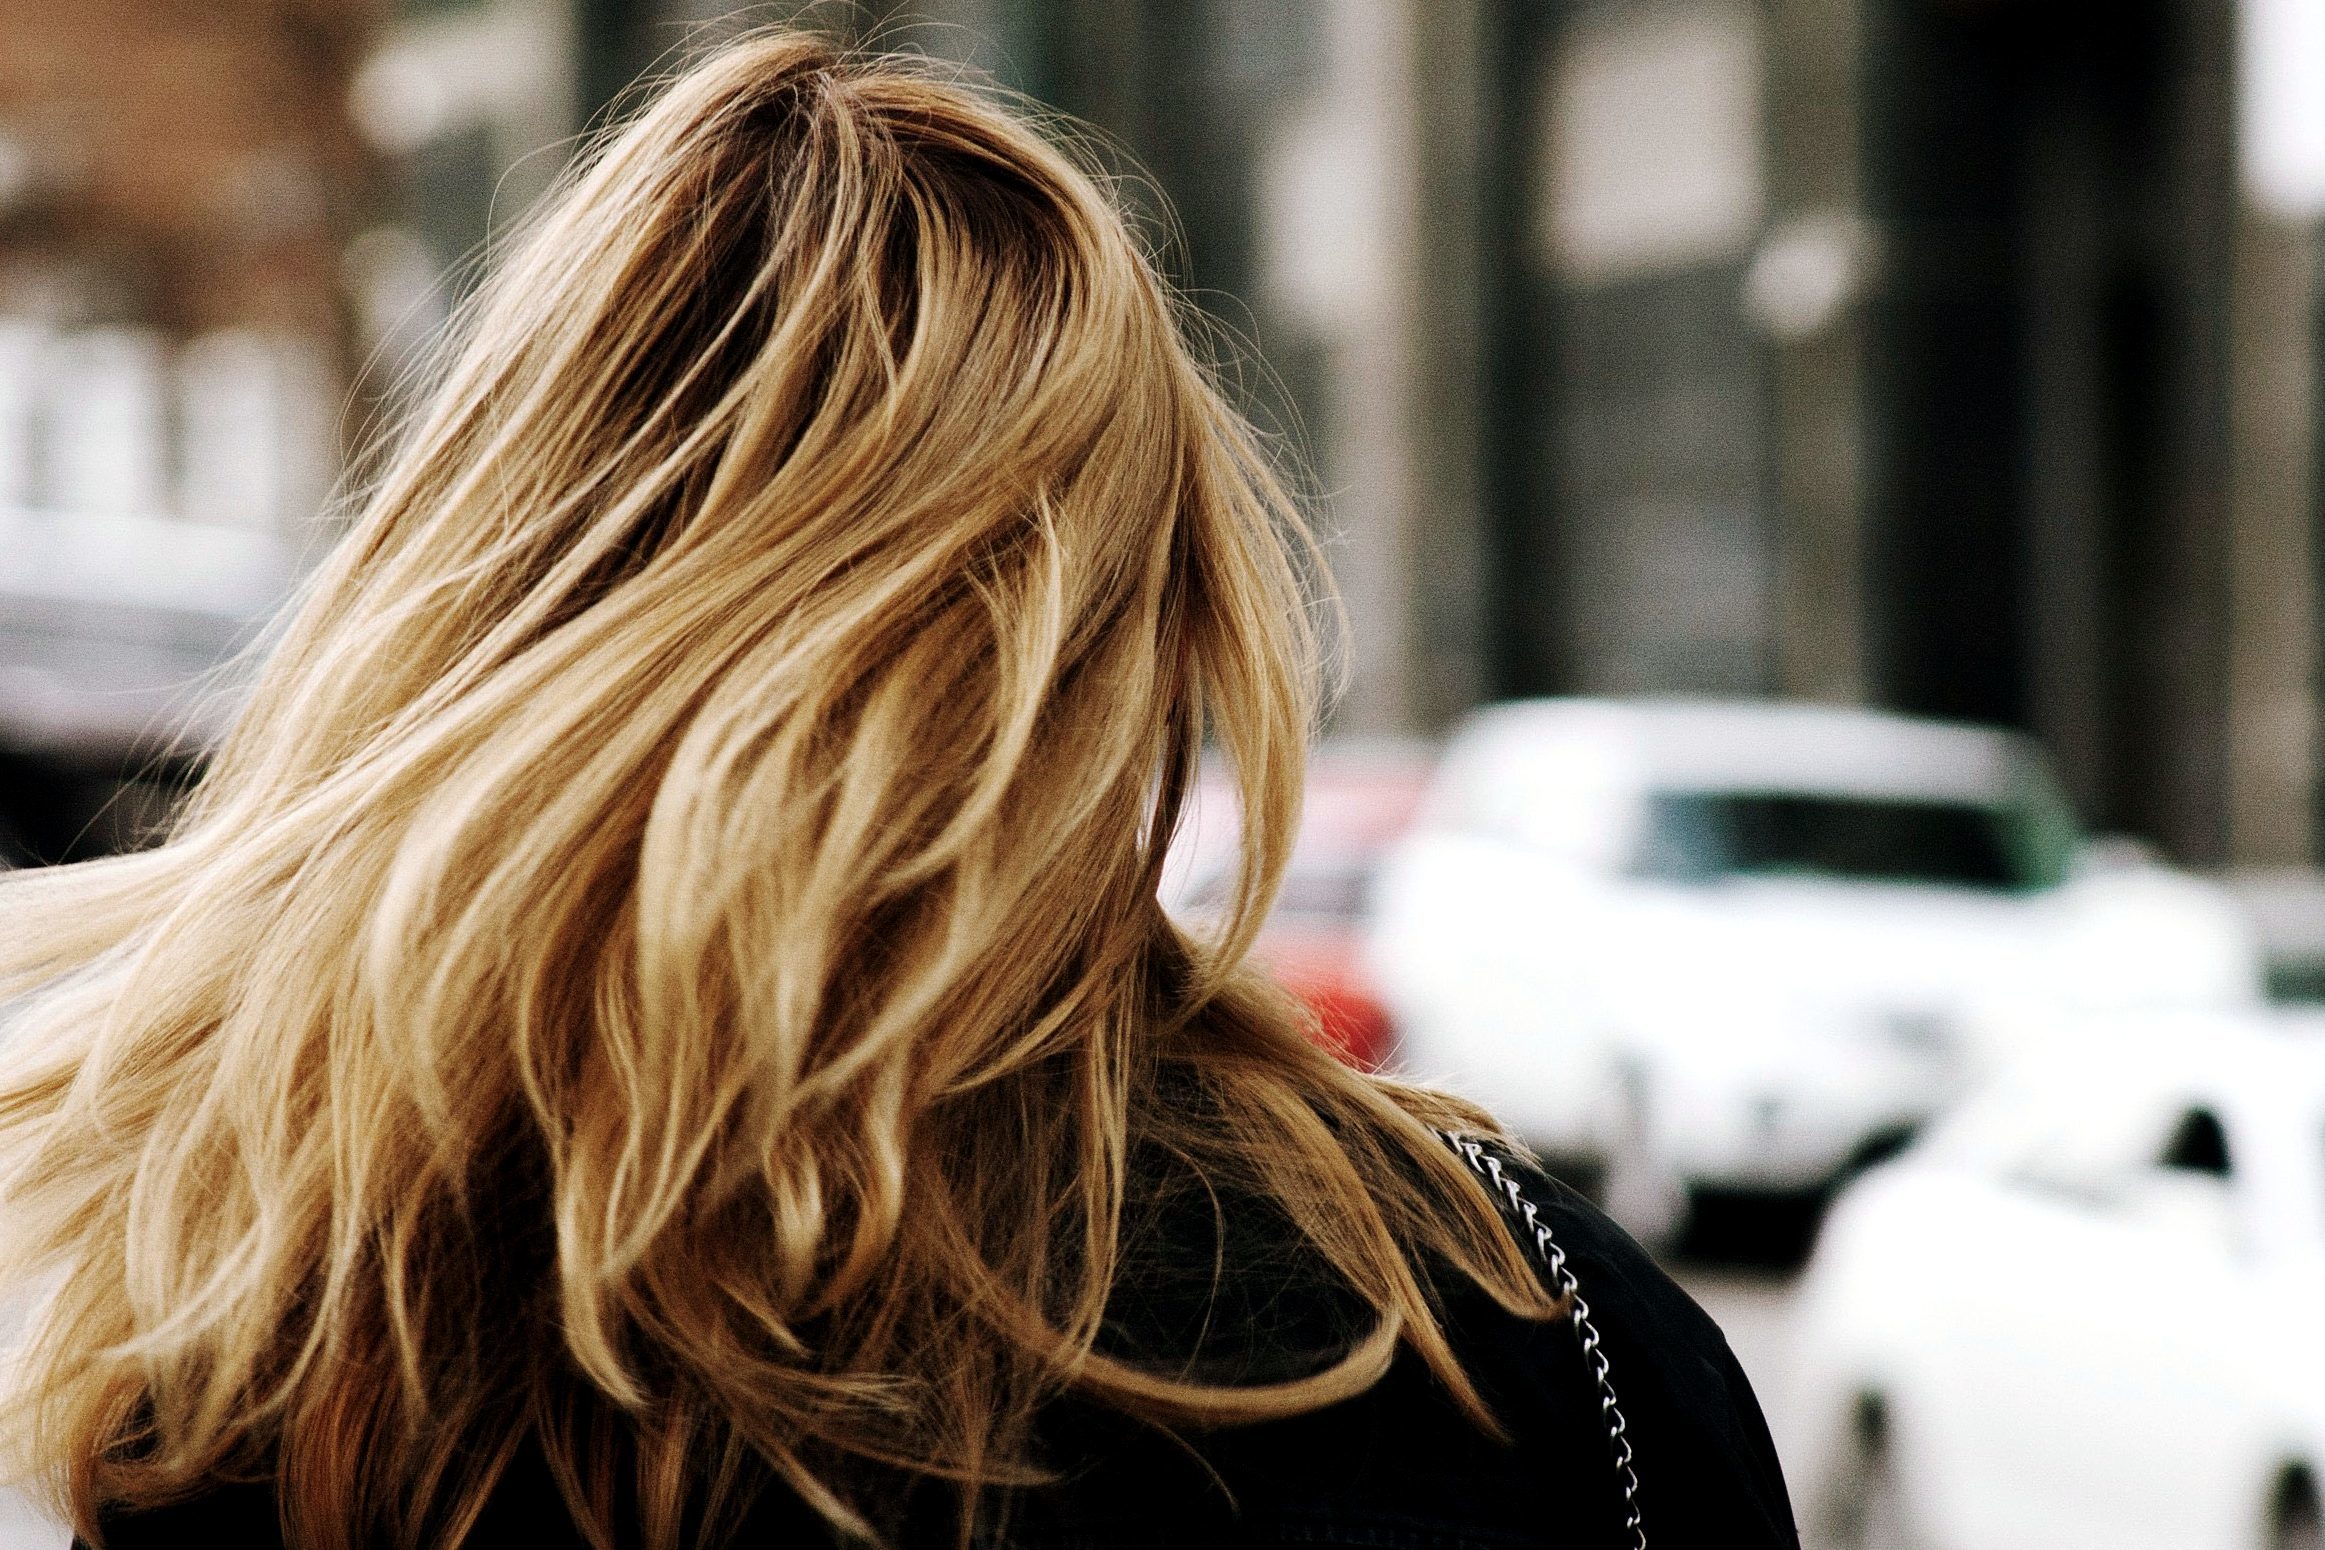 Free picture: back, woman, head, blonde hair